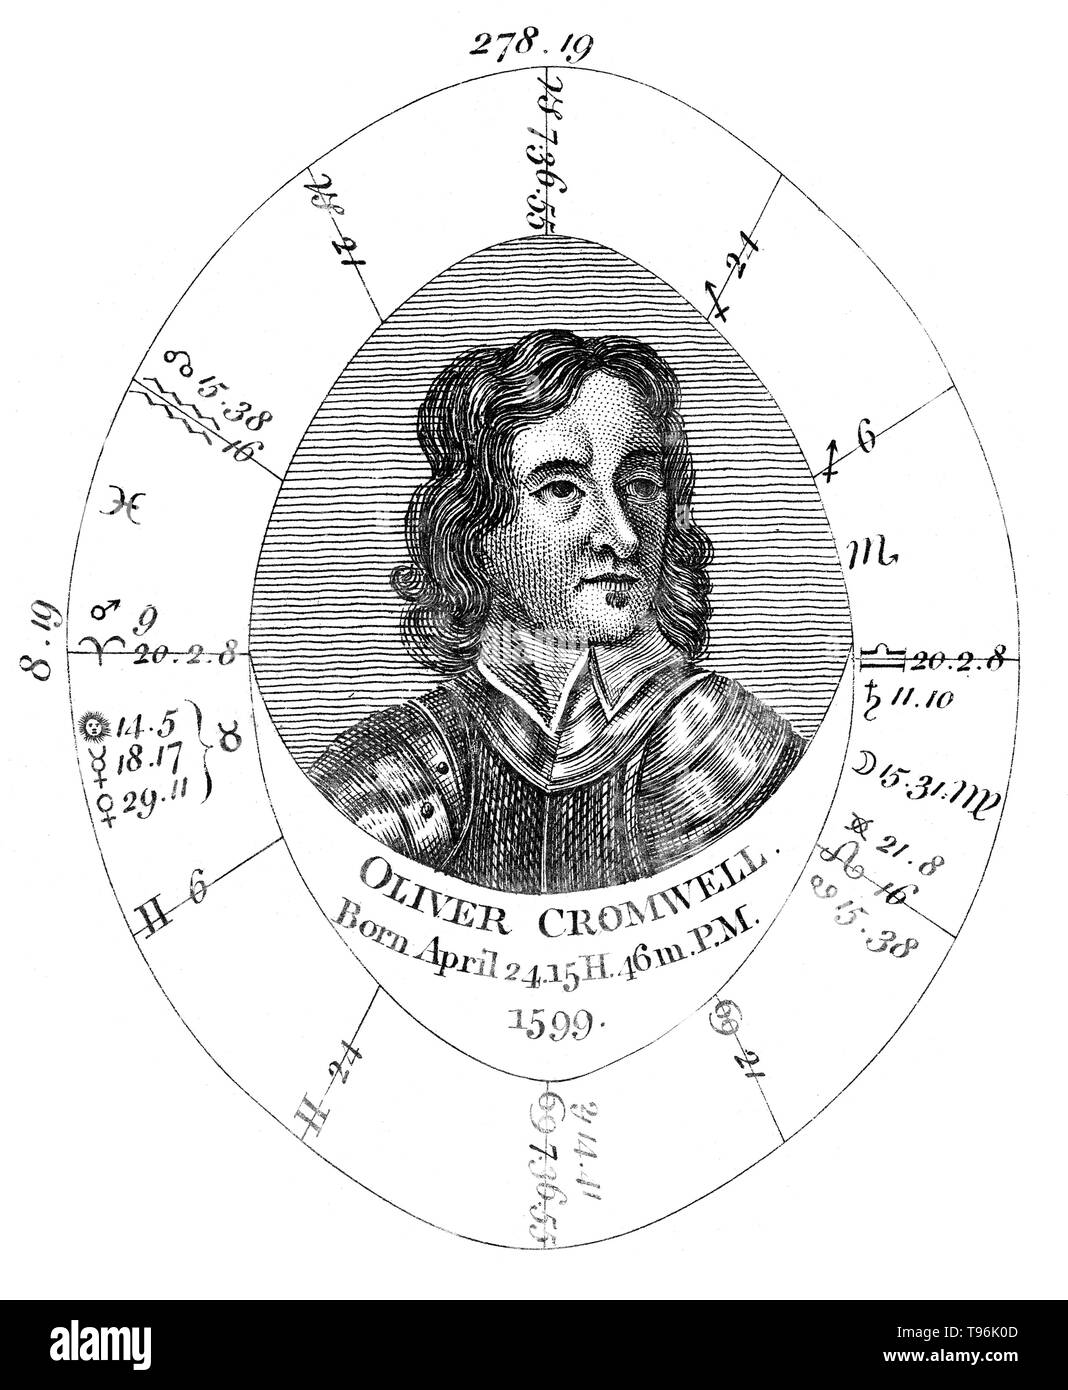 Astrological birth chart for Oliver Cromwell by Ebenezer Sibly, undated. Oliver Cromwell (April 25, 1599 - September 3, 1658) was an English military and political leader. He served as Lord Protector of the Commonwealth of England, Scotland, and Ireland from 1653 until his death, acting simultaneously as head of state and head of government of the new republic. Stock Photo